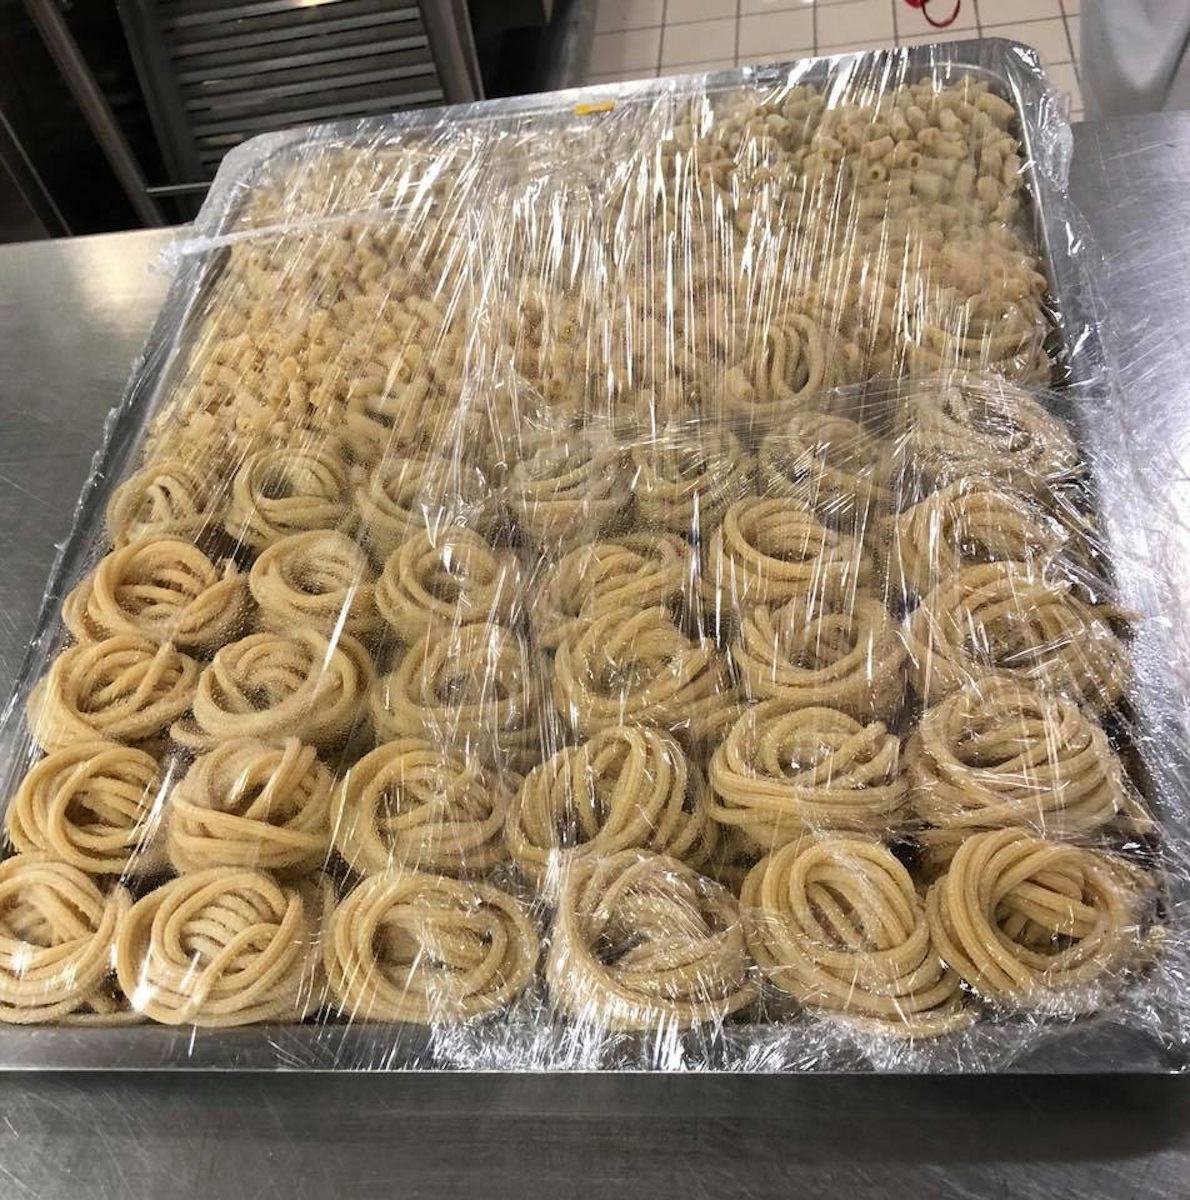 Pasta was made from scratch every day. We took a behind the scenes tour of